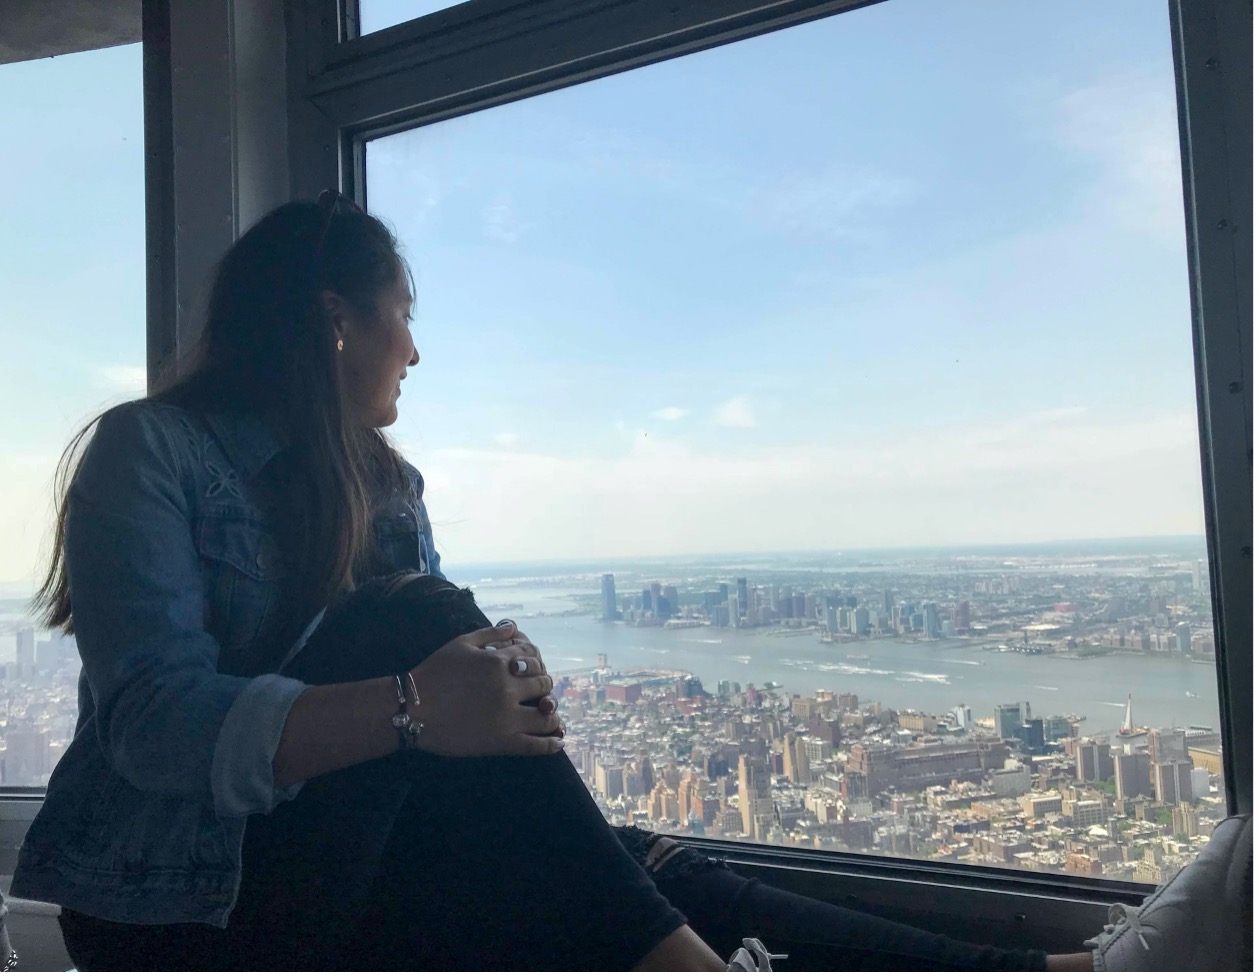 A Latinx woman sitting on a window ledge looking out onto an aerial view of a city.